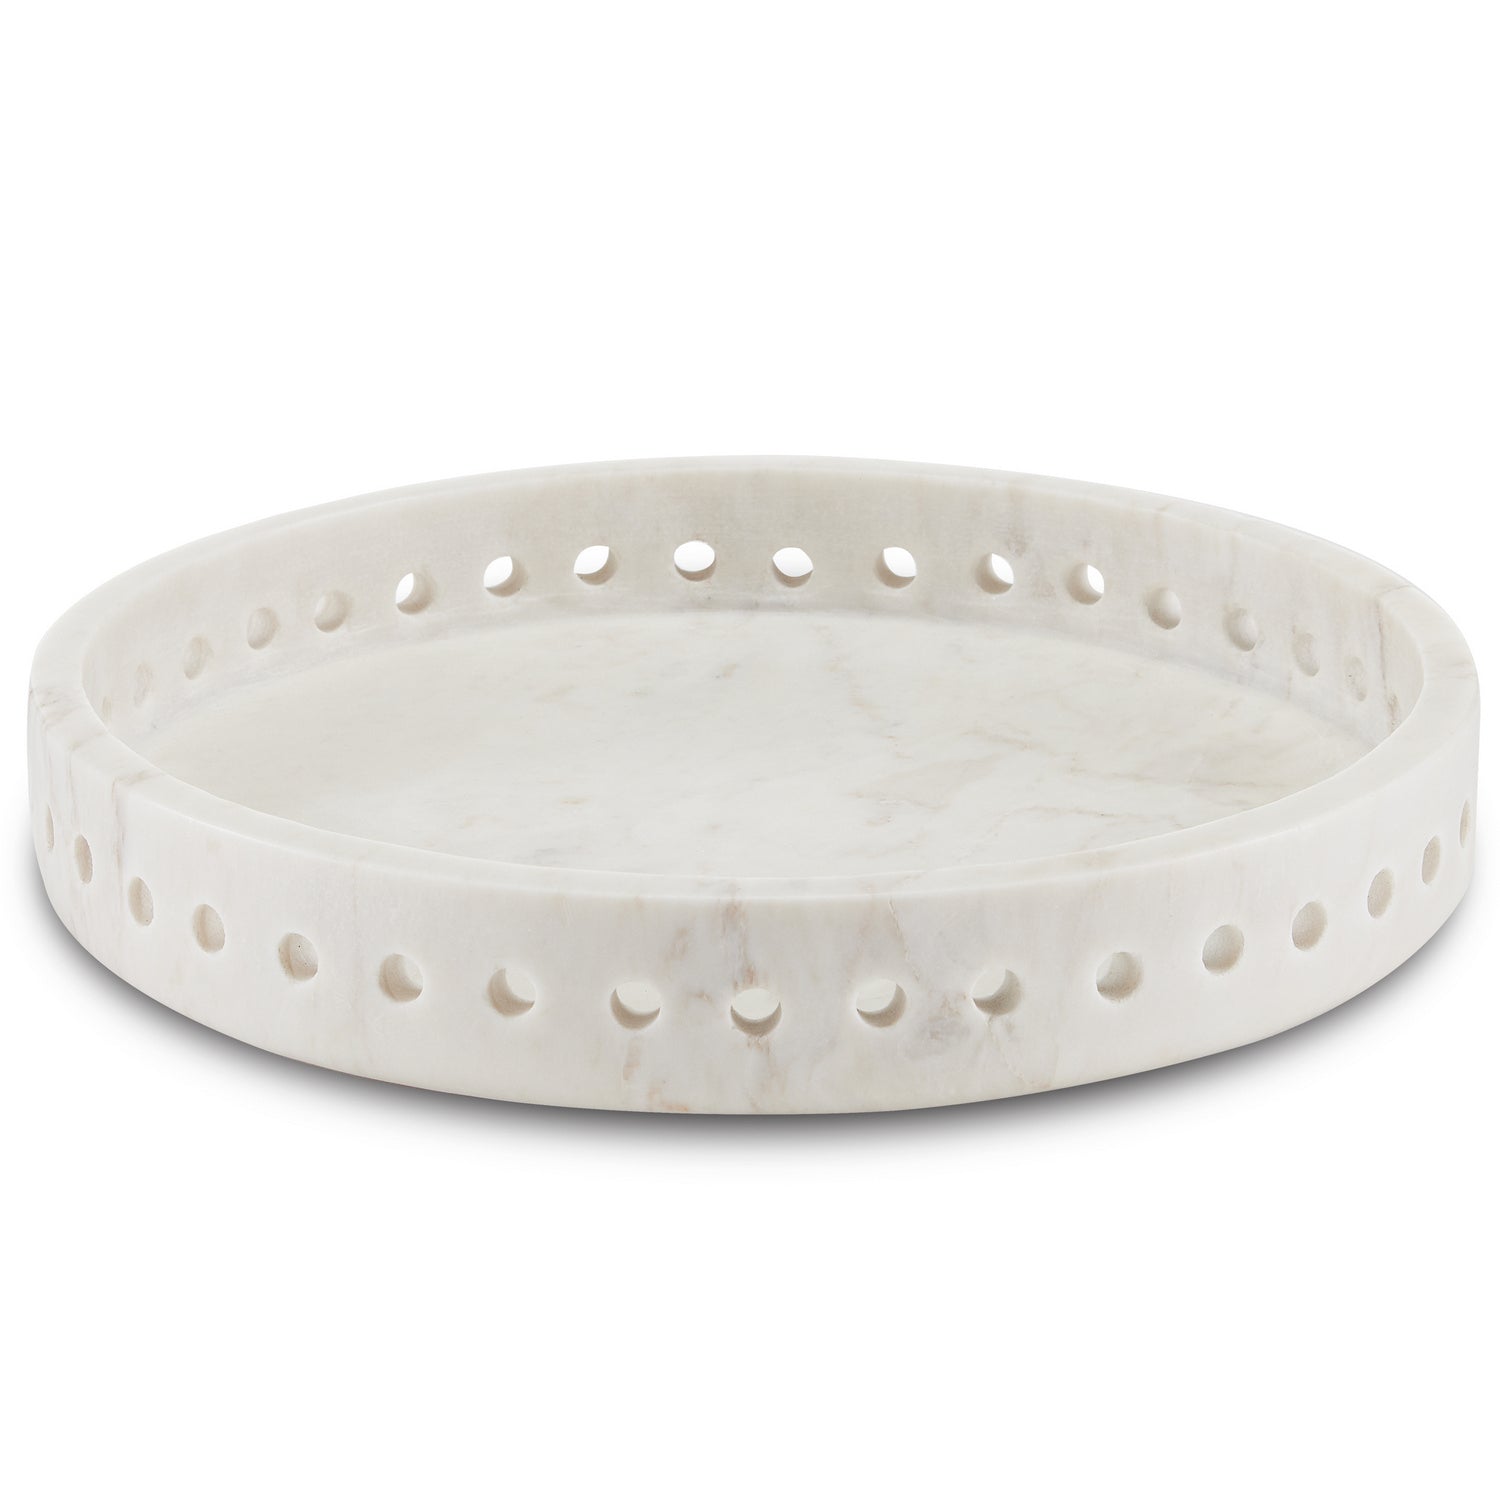 Tray from the Freya collection in White finish